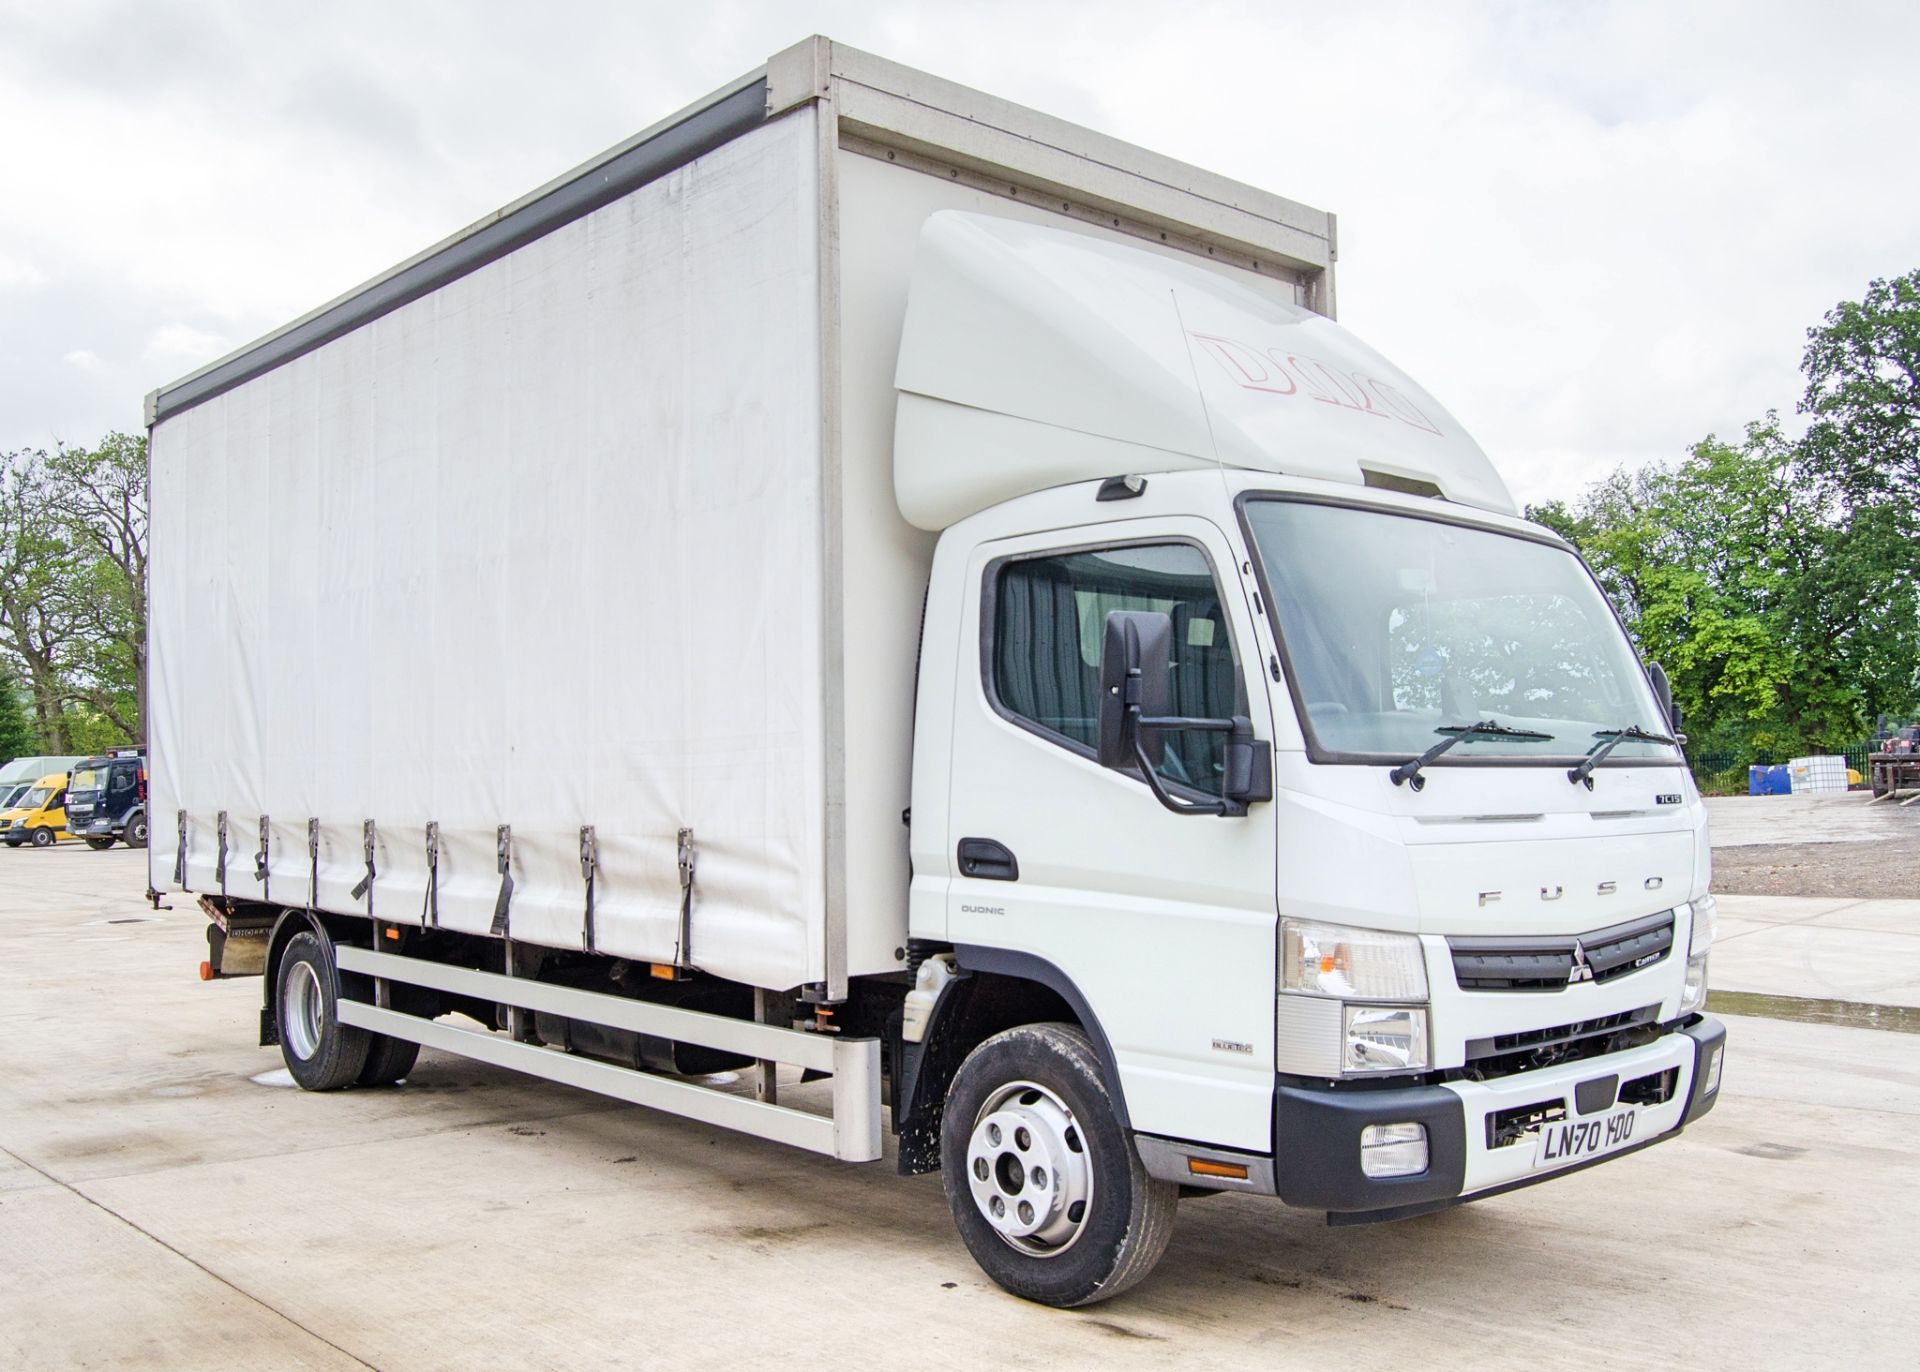 Mitsubishi Fuso Canter 7C15 Duonic 7.5 tonne automatic curtain sided lorry Registration Number: LN70 - Image 2 of 26